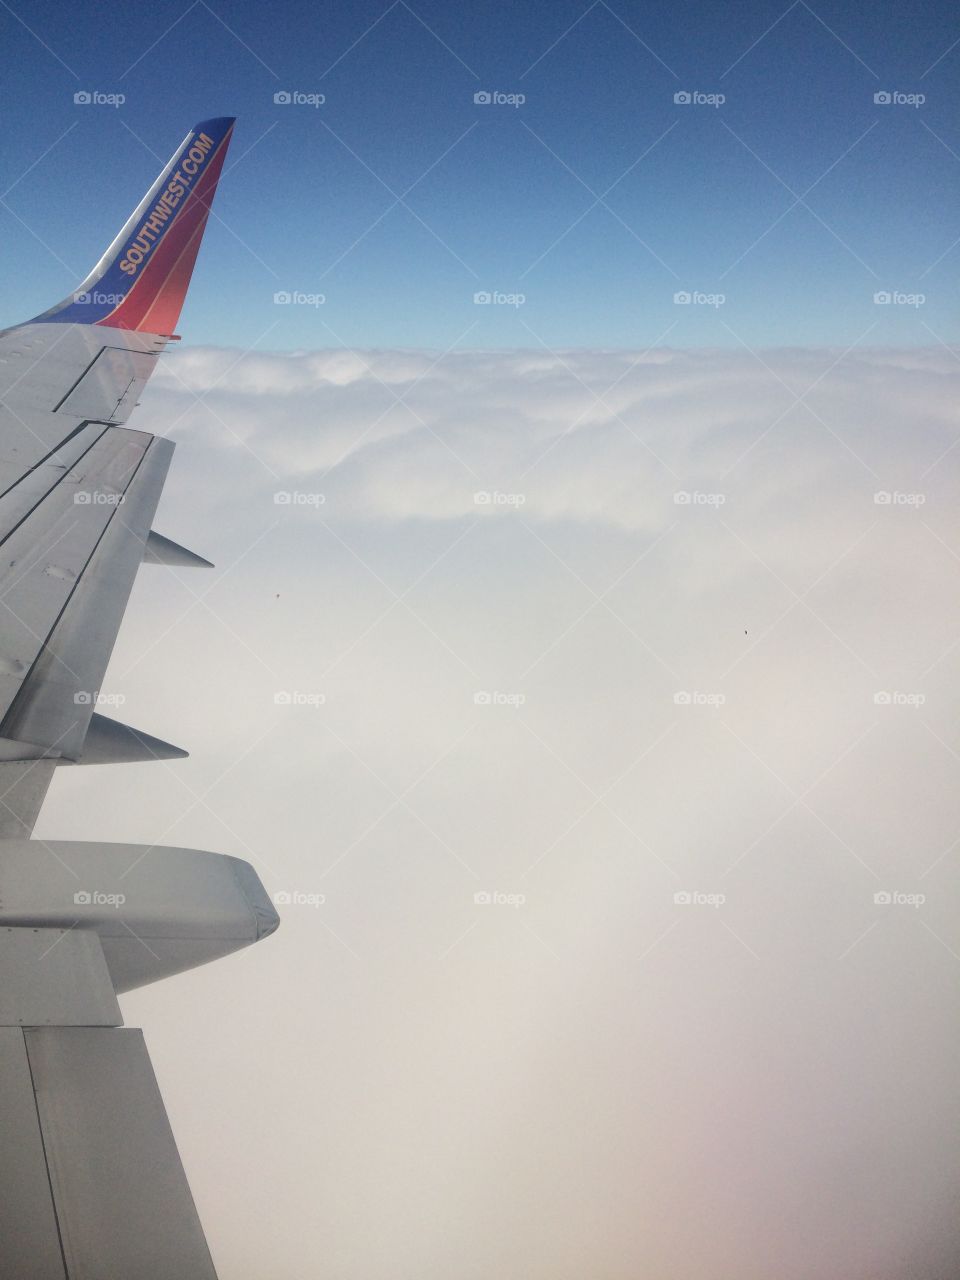 It's a beautiful day above the clouds